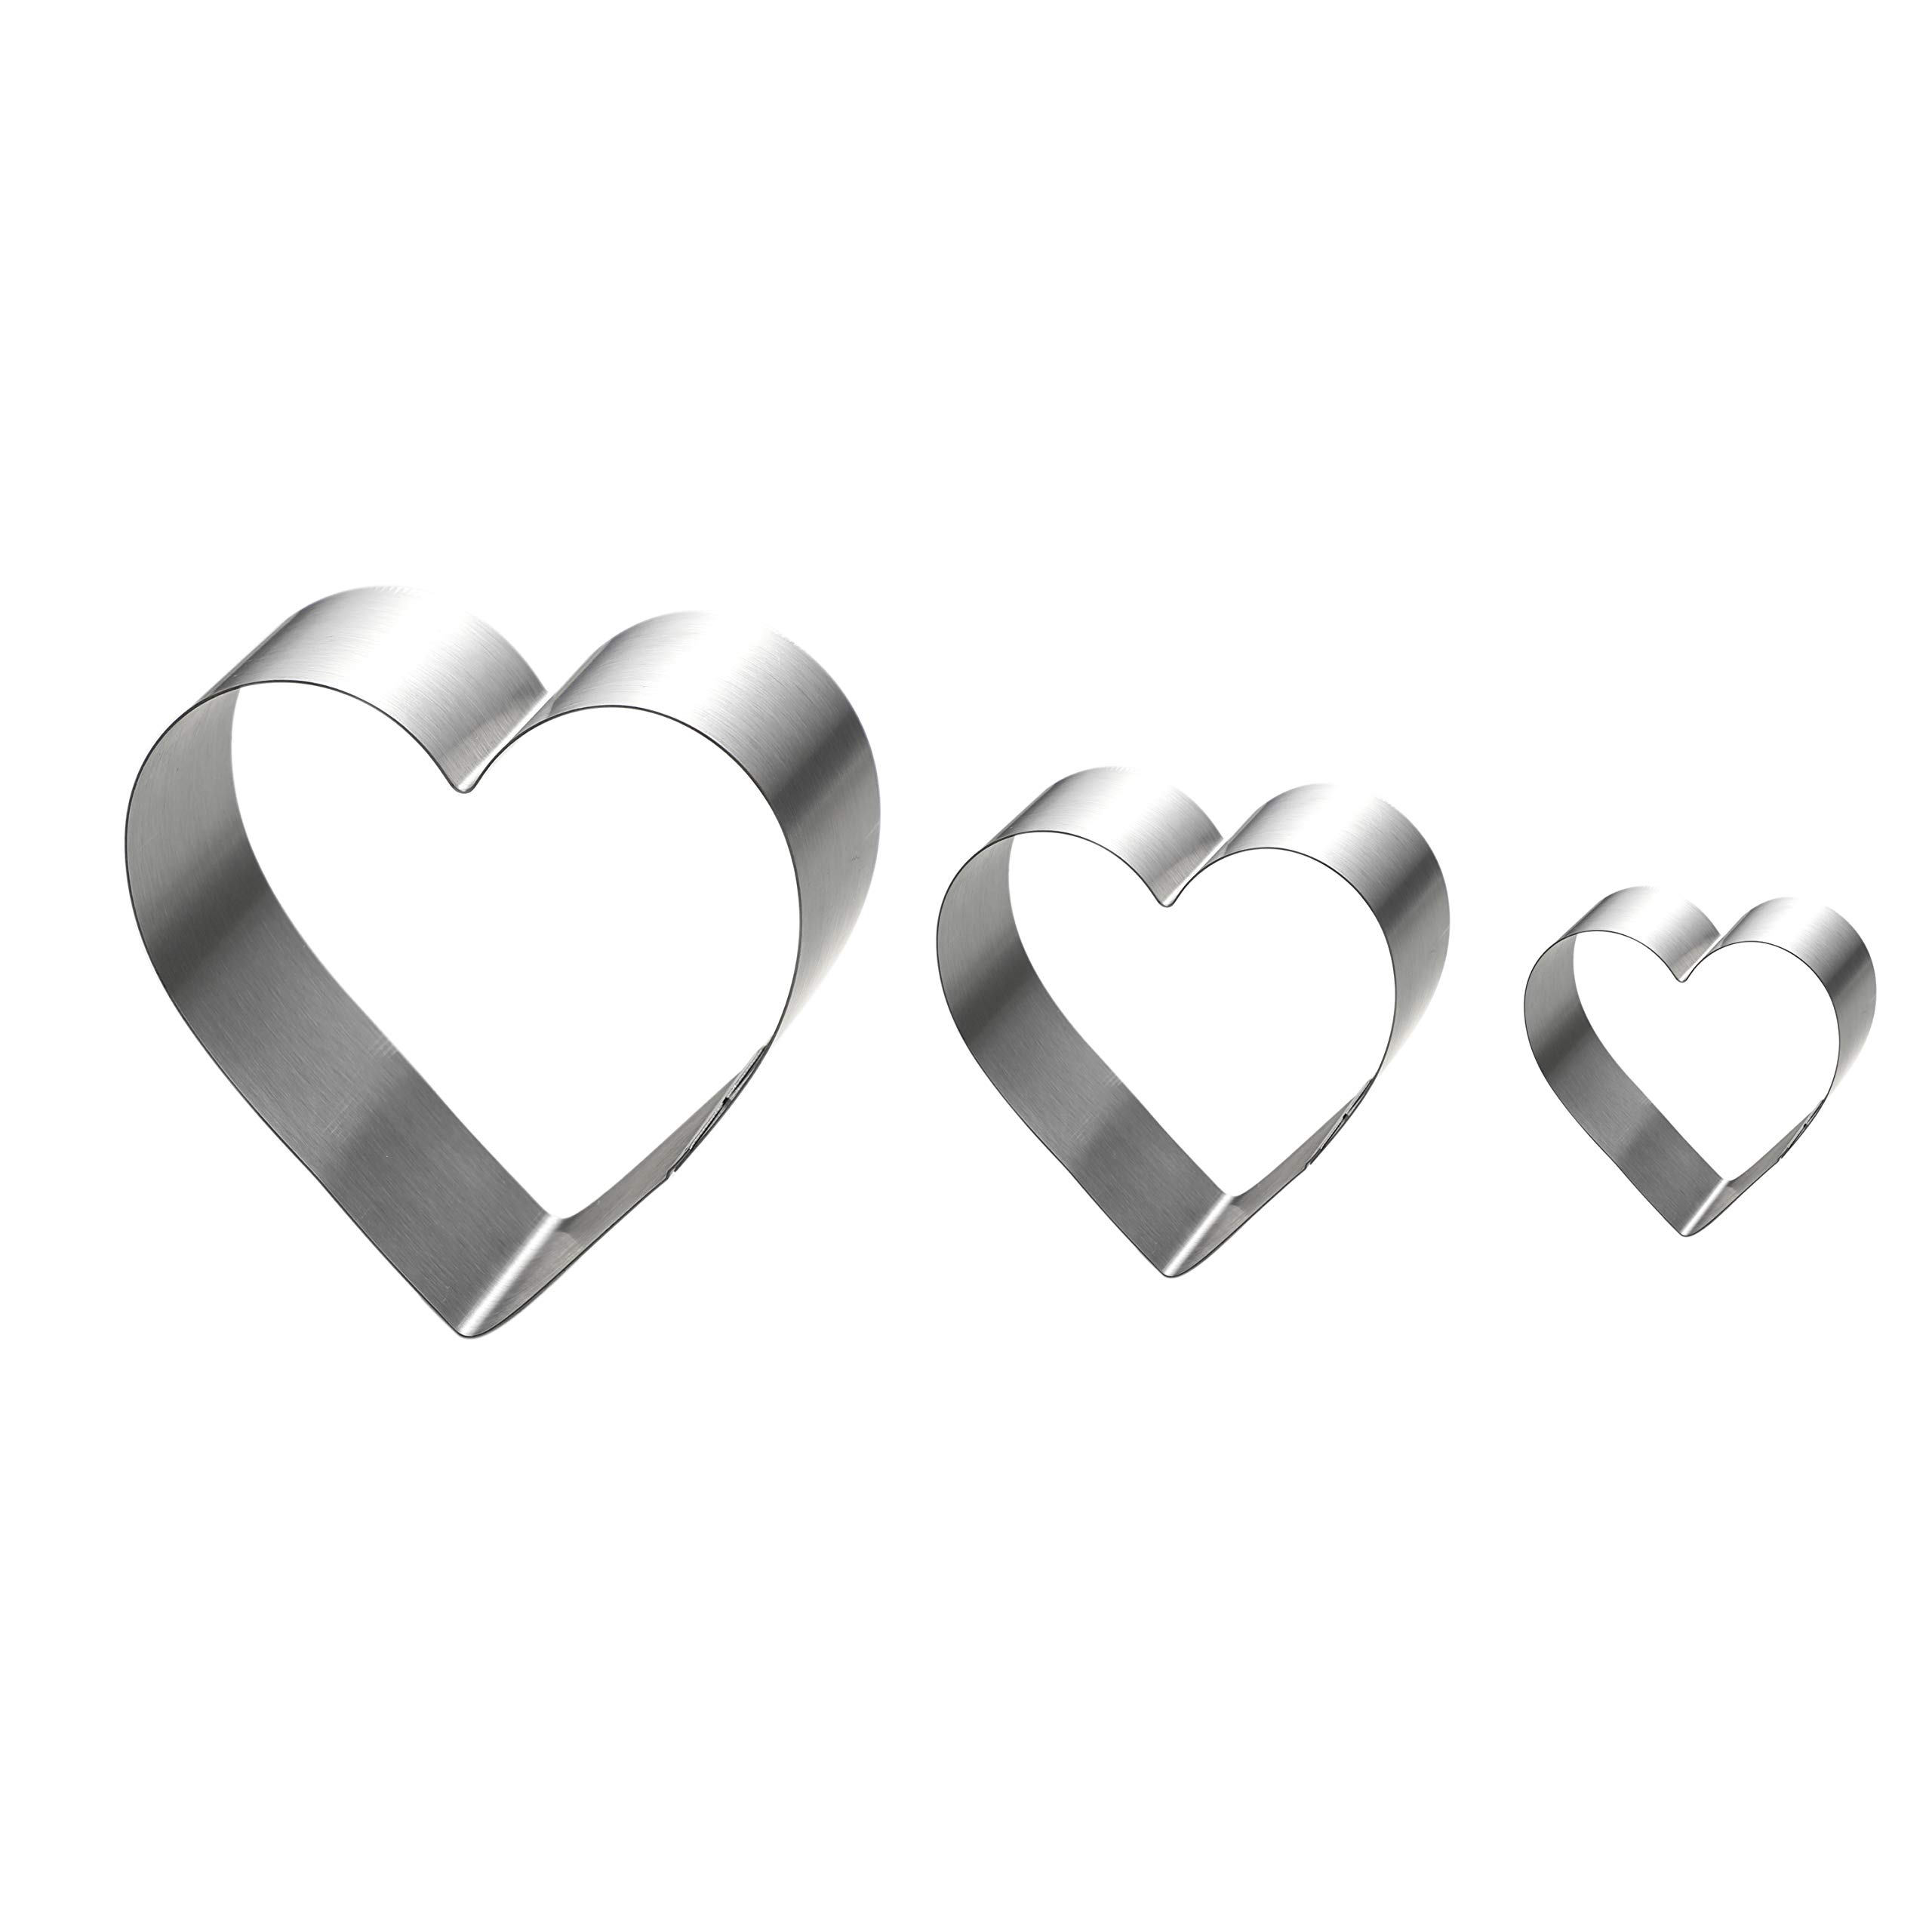 Heart Cake Mold Ring Set-4/6/8 Inch Large Heart Cookie Cutter Pancake Mold Stainless Steel